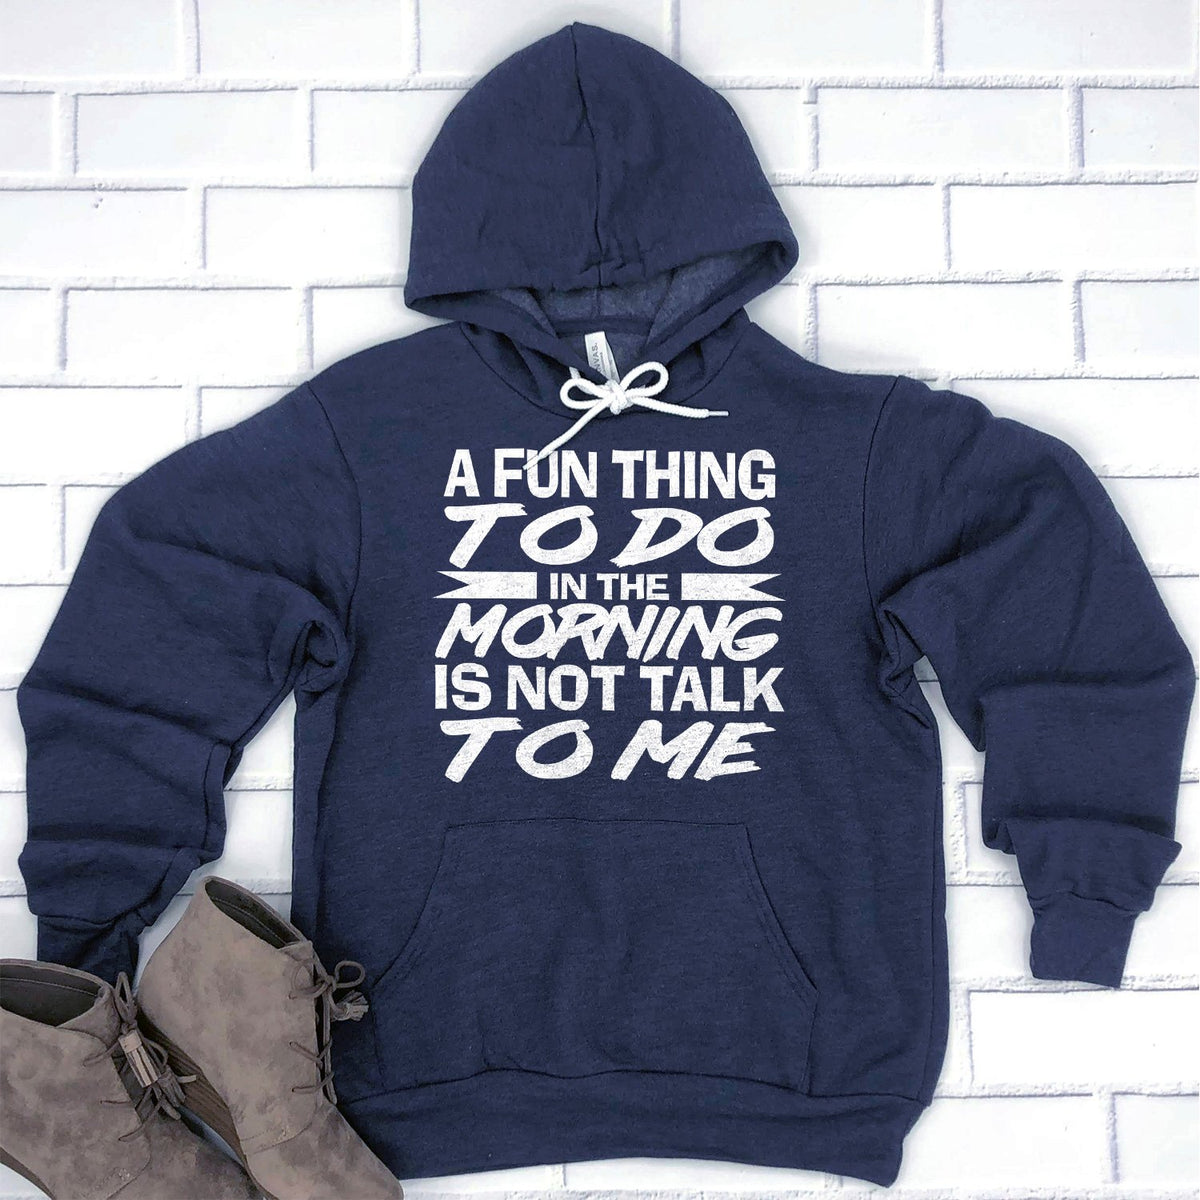 A Fun Thing To Do in The Morning is Not Talk To Me - Hoodie Sweatshirt